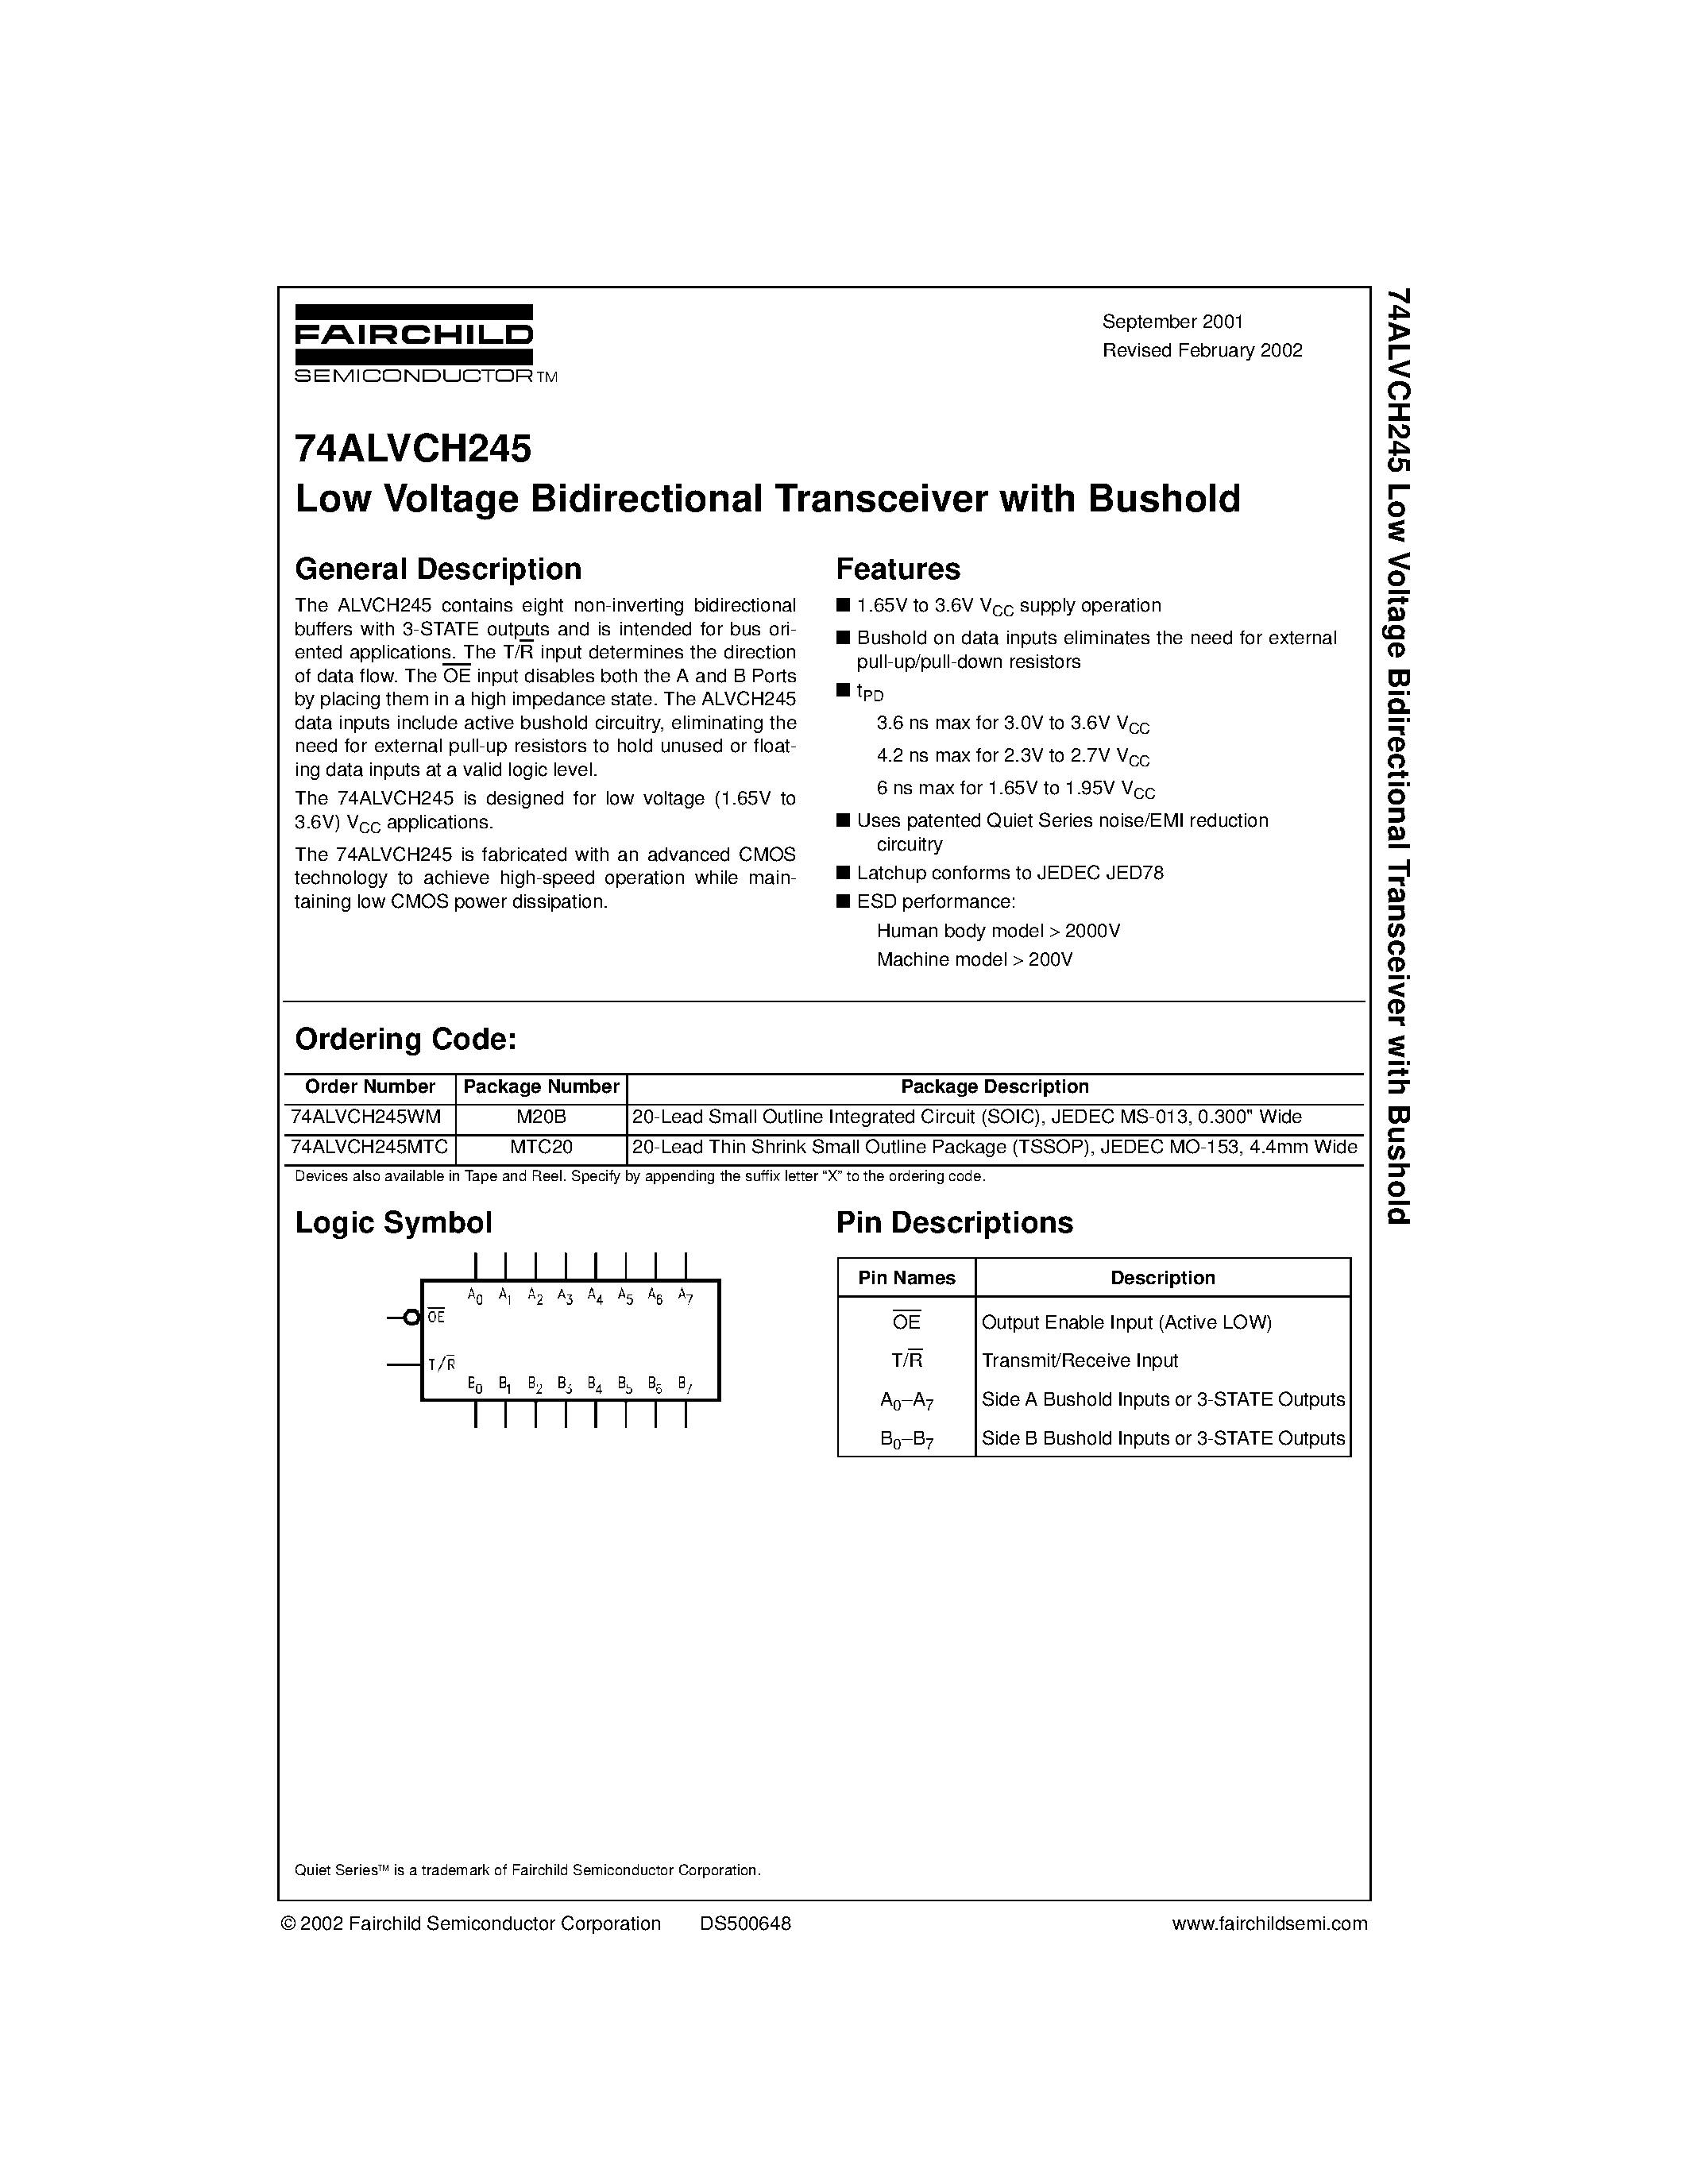 Datasheet 74ALVCH245 - Low Voltage Bidirectional Transceiver with Bushold page 1